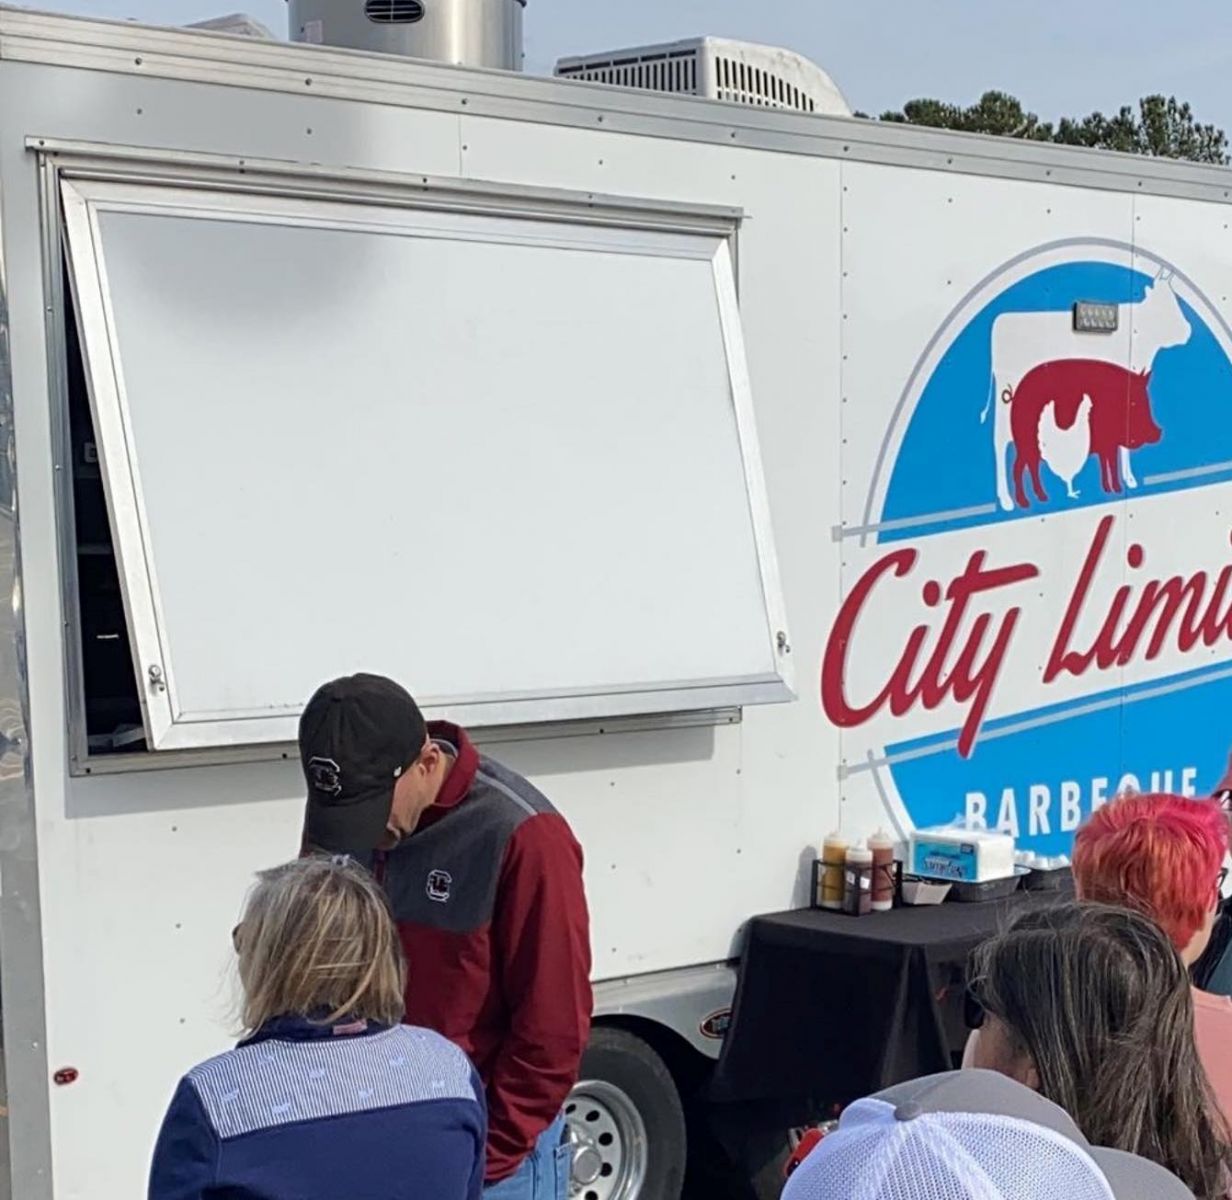 Robbie Robinson, owner of City Limits Barbeque food truck, says his to-go food service has not had to make many changes in its operations amid new coronavirus concerns, though his next planned service will consist only of online preorders. (Photo/Provided)